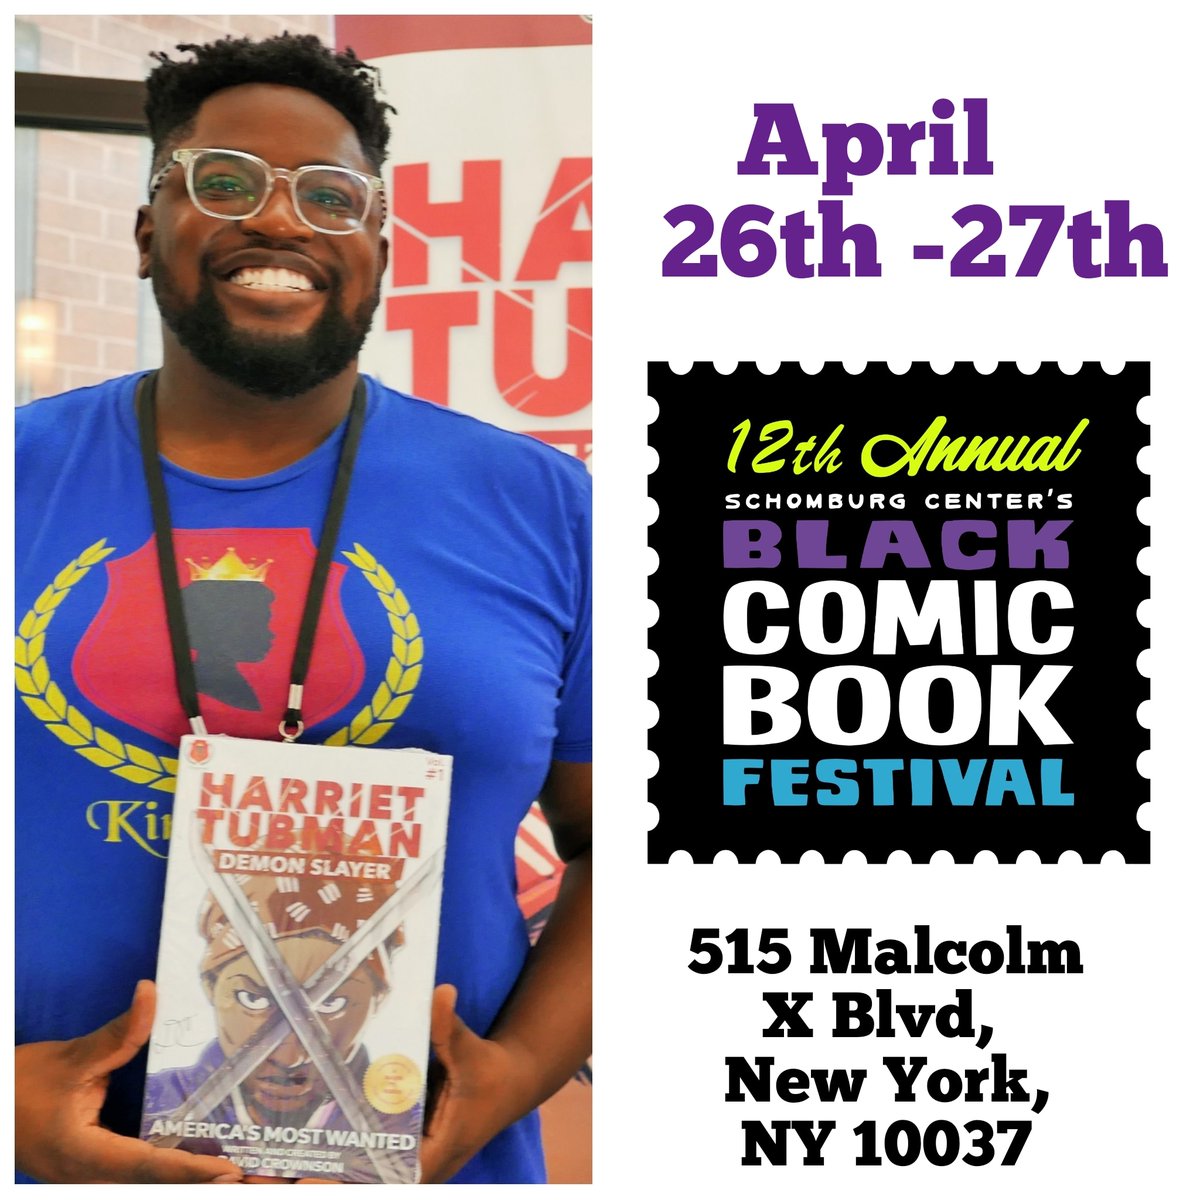 Hey everyone! This weekend I'm exhibiting at the 2024 #schomcom! Meet me @SchomburgCenter, on April 26th & 27th. It’s free!  Come hang and buy comics! Go to schomcom.org or tinyurl.com/schomcom2 to register! #harriettubmandemonslayer @UpToTASK